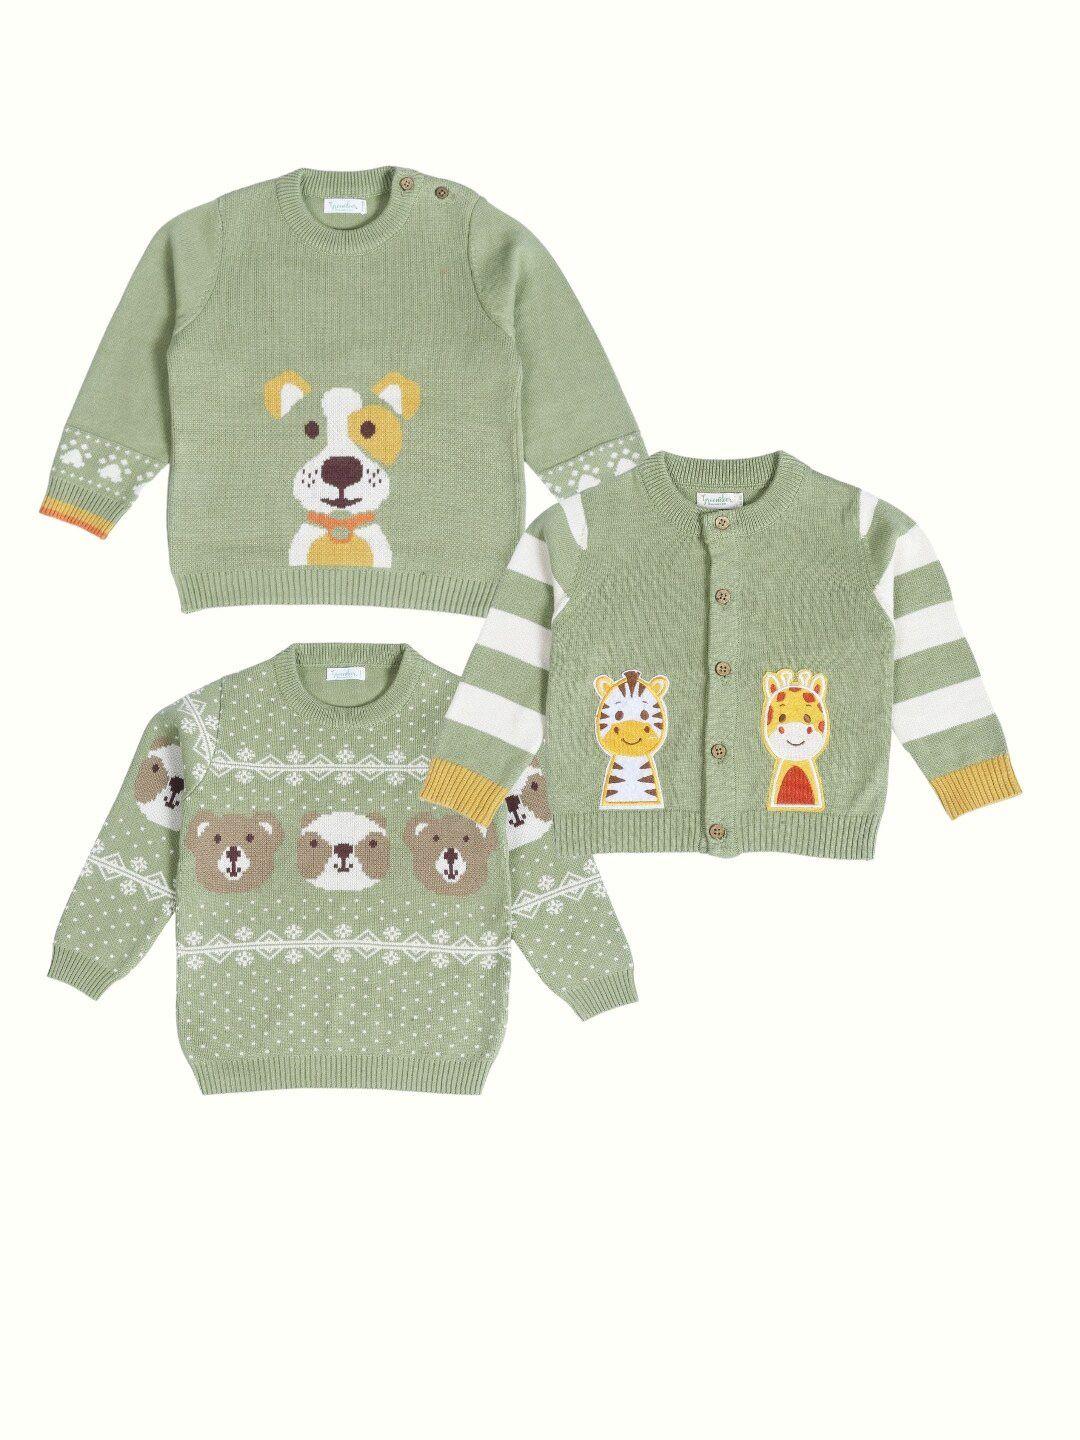 greendeer kids pack of 3 graphic printed pure cotton sweaters